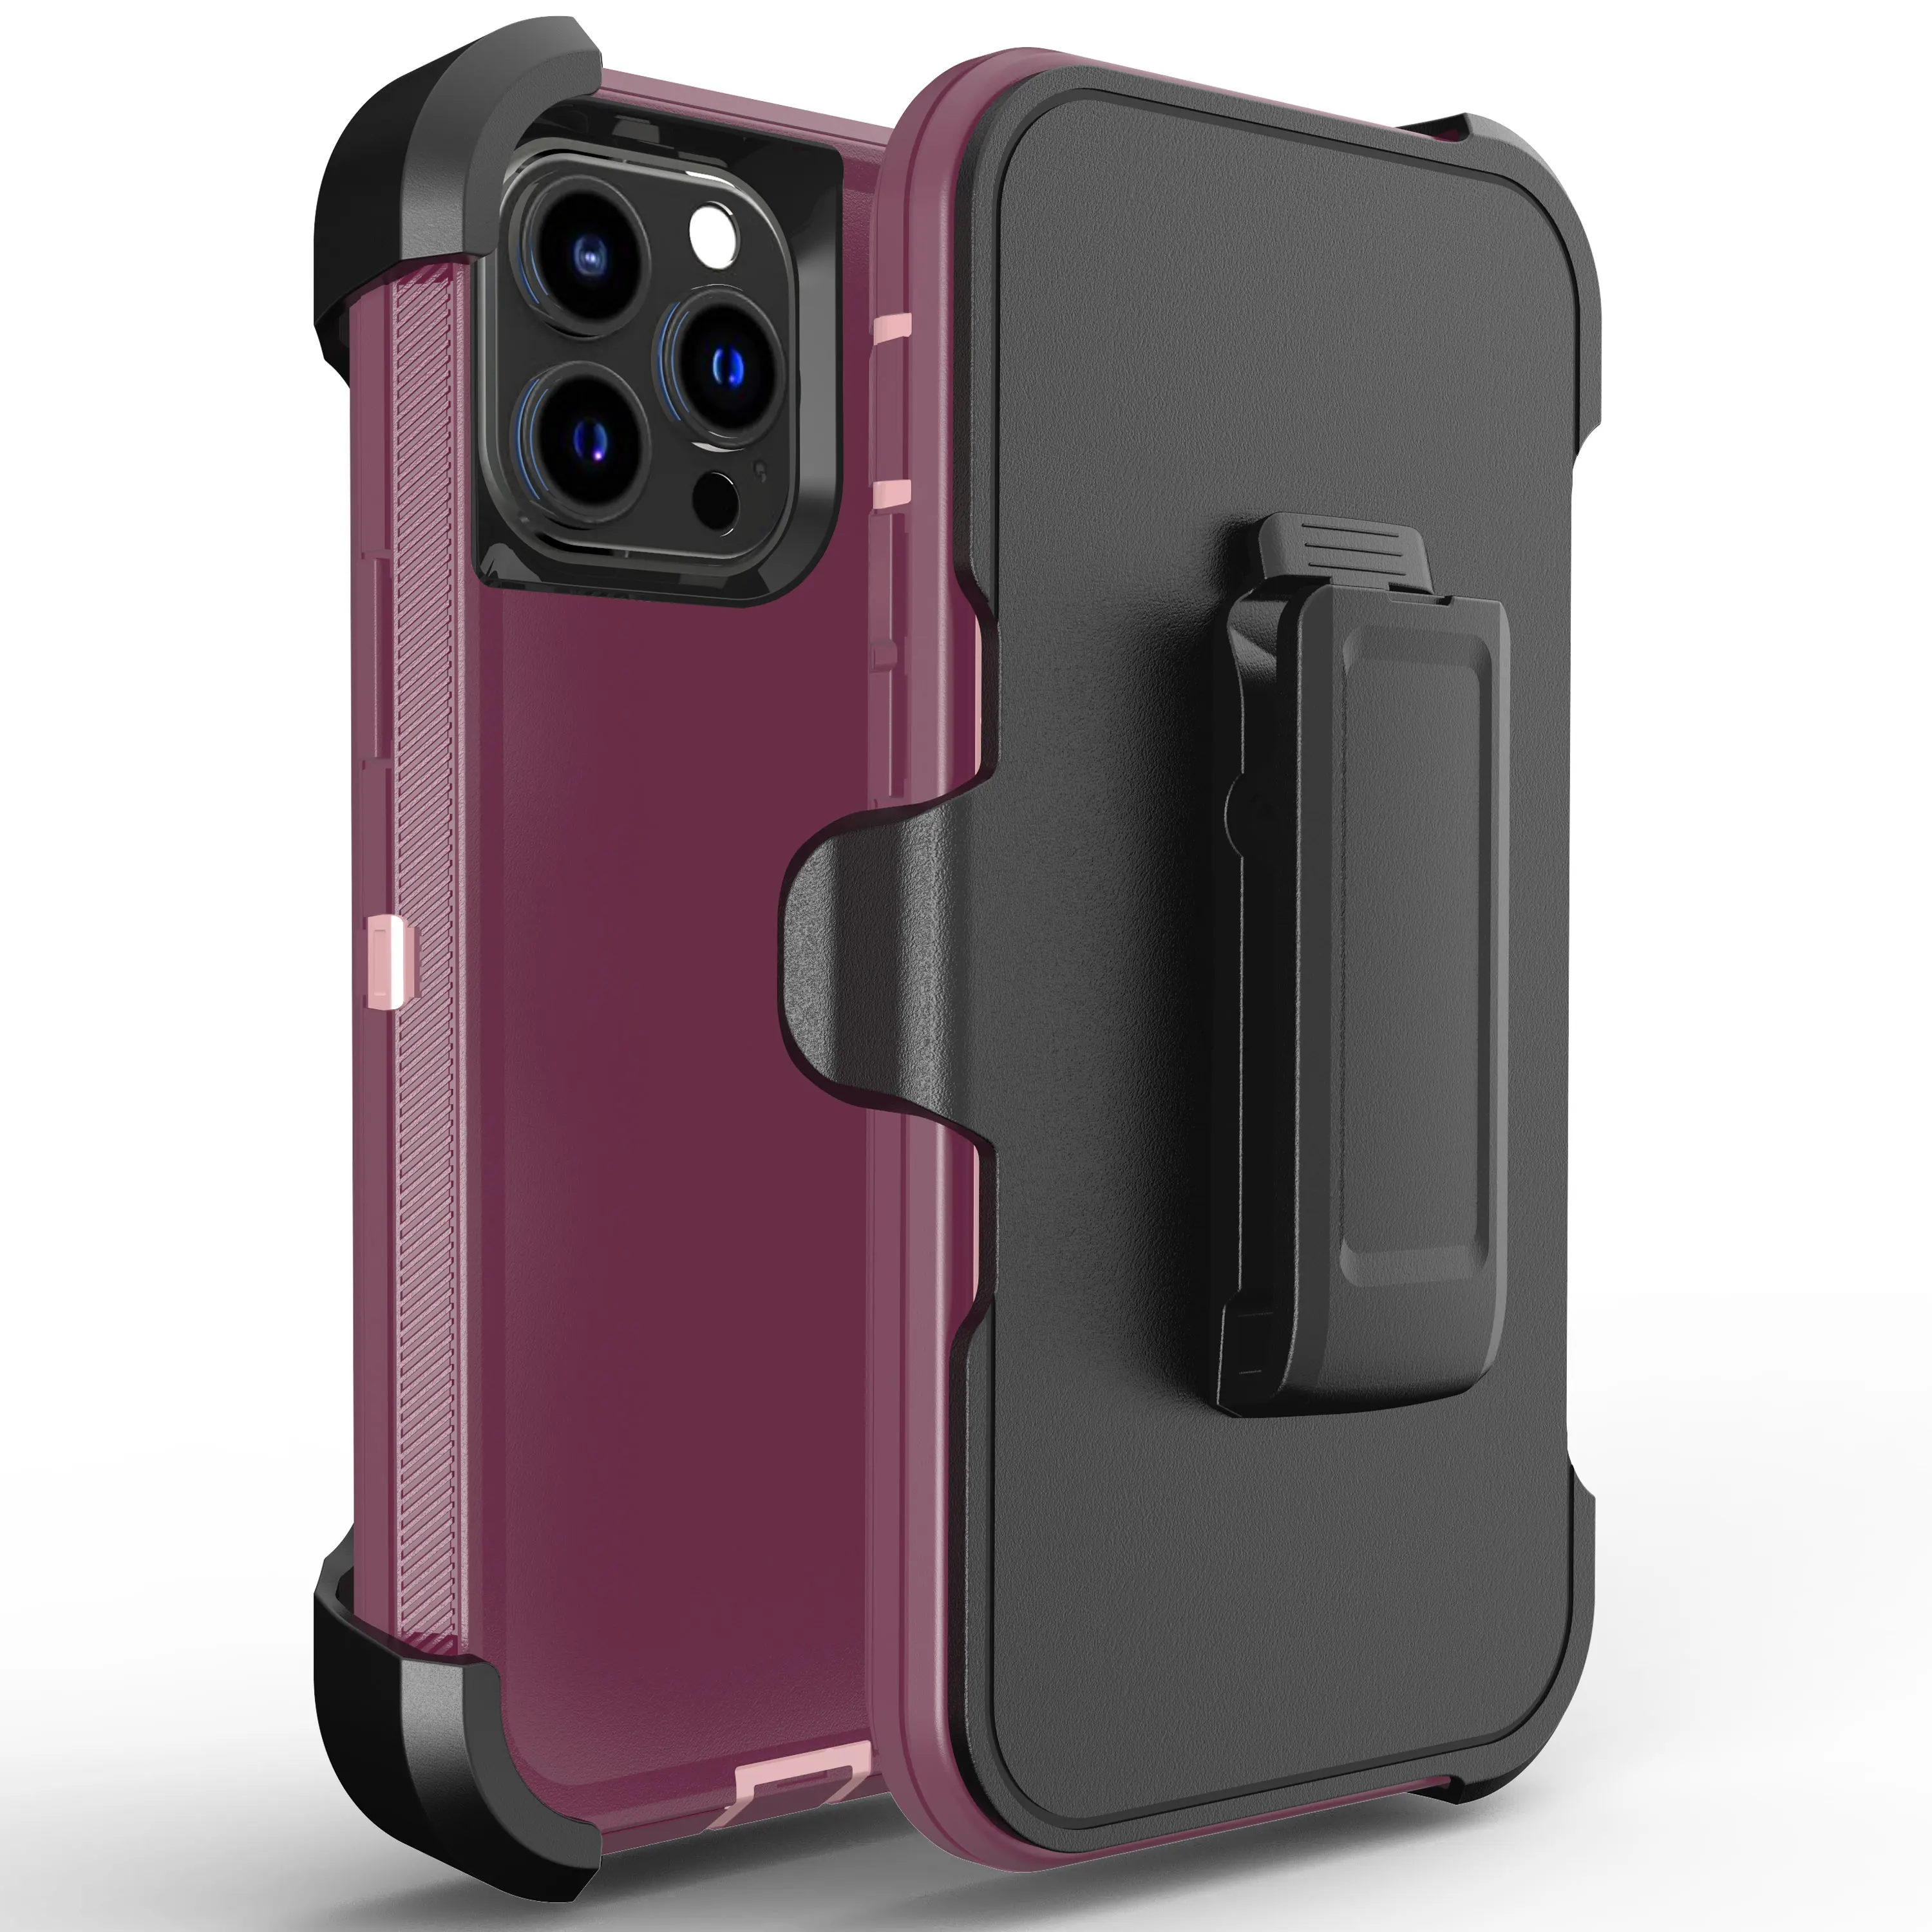 Original Heavy Duty Armor Case for iPhone 13 12 11 ProMax 3 in 1 Shockproof Case + Belt Clip for iPhone XS Max XR 6S 7P 8P moto g play case